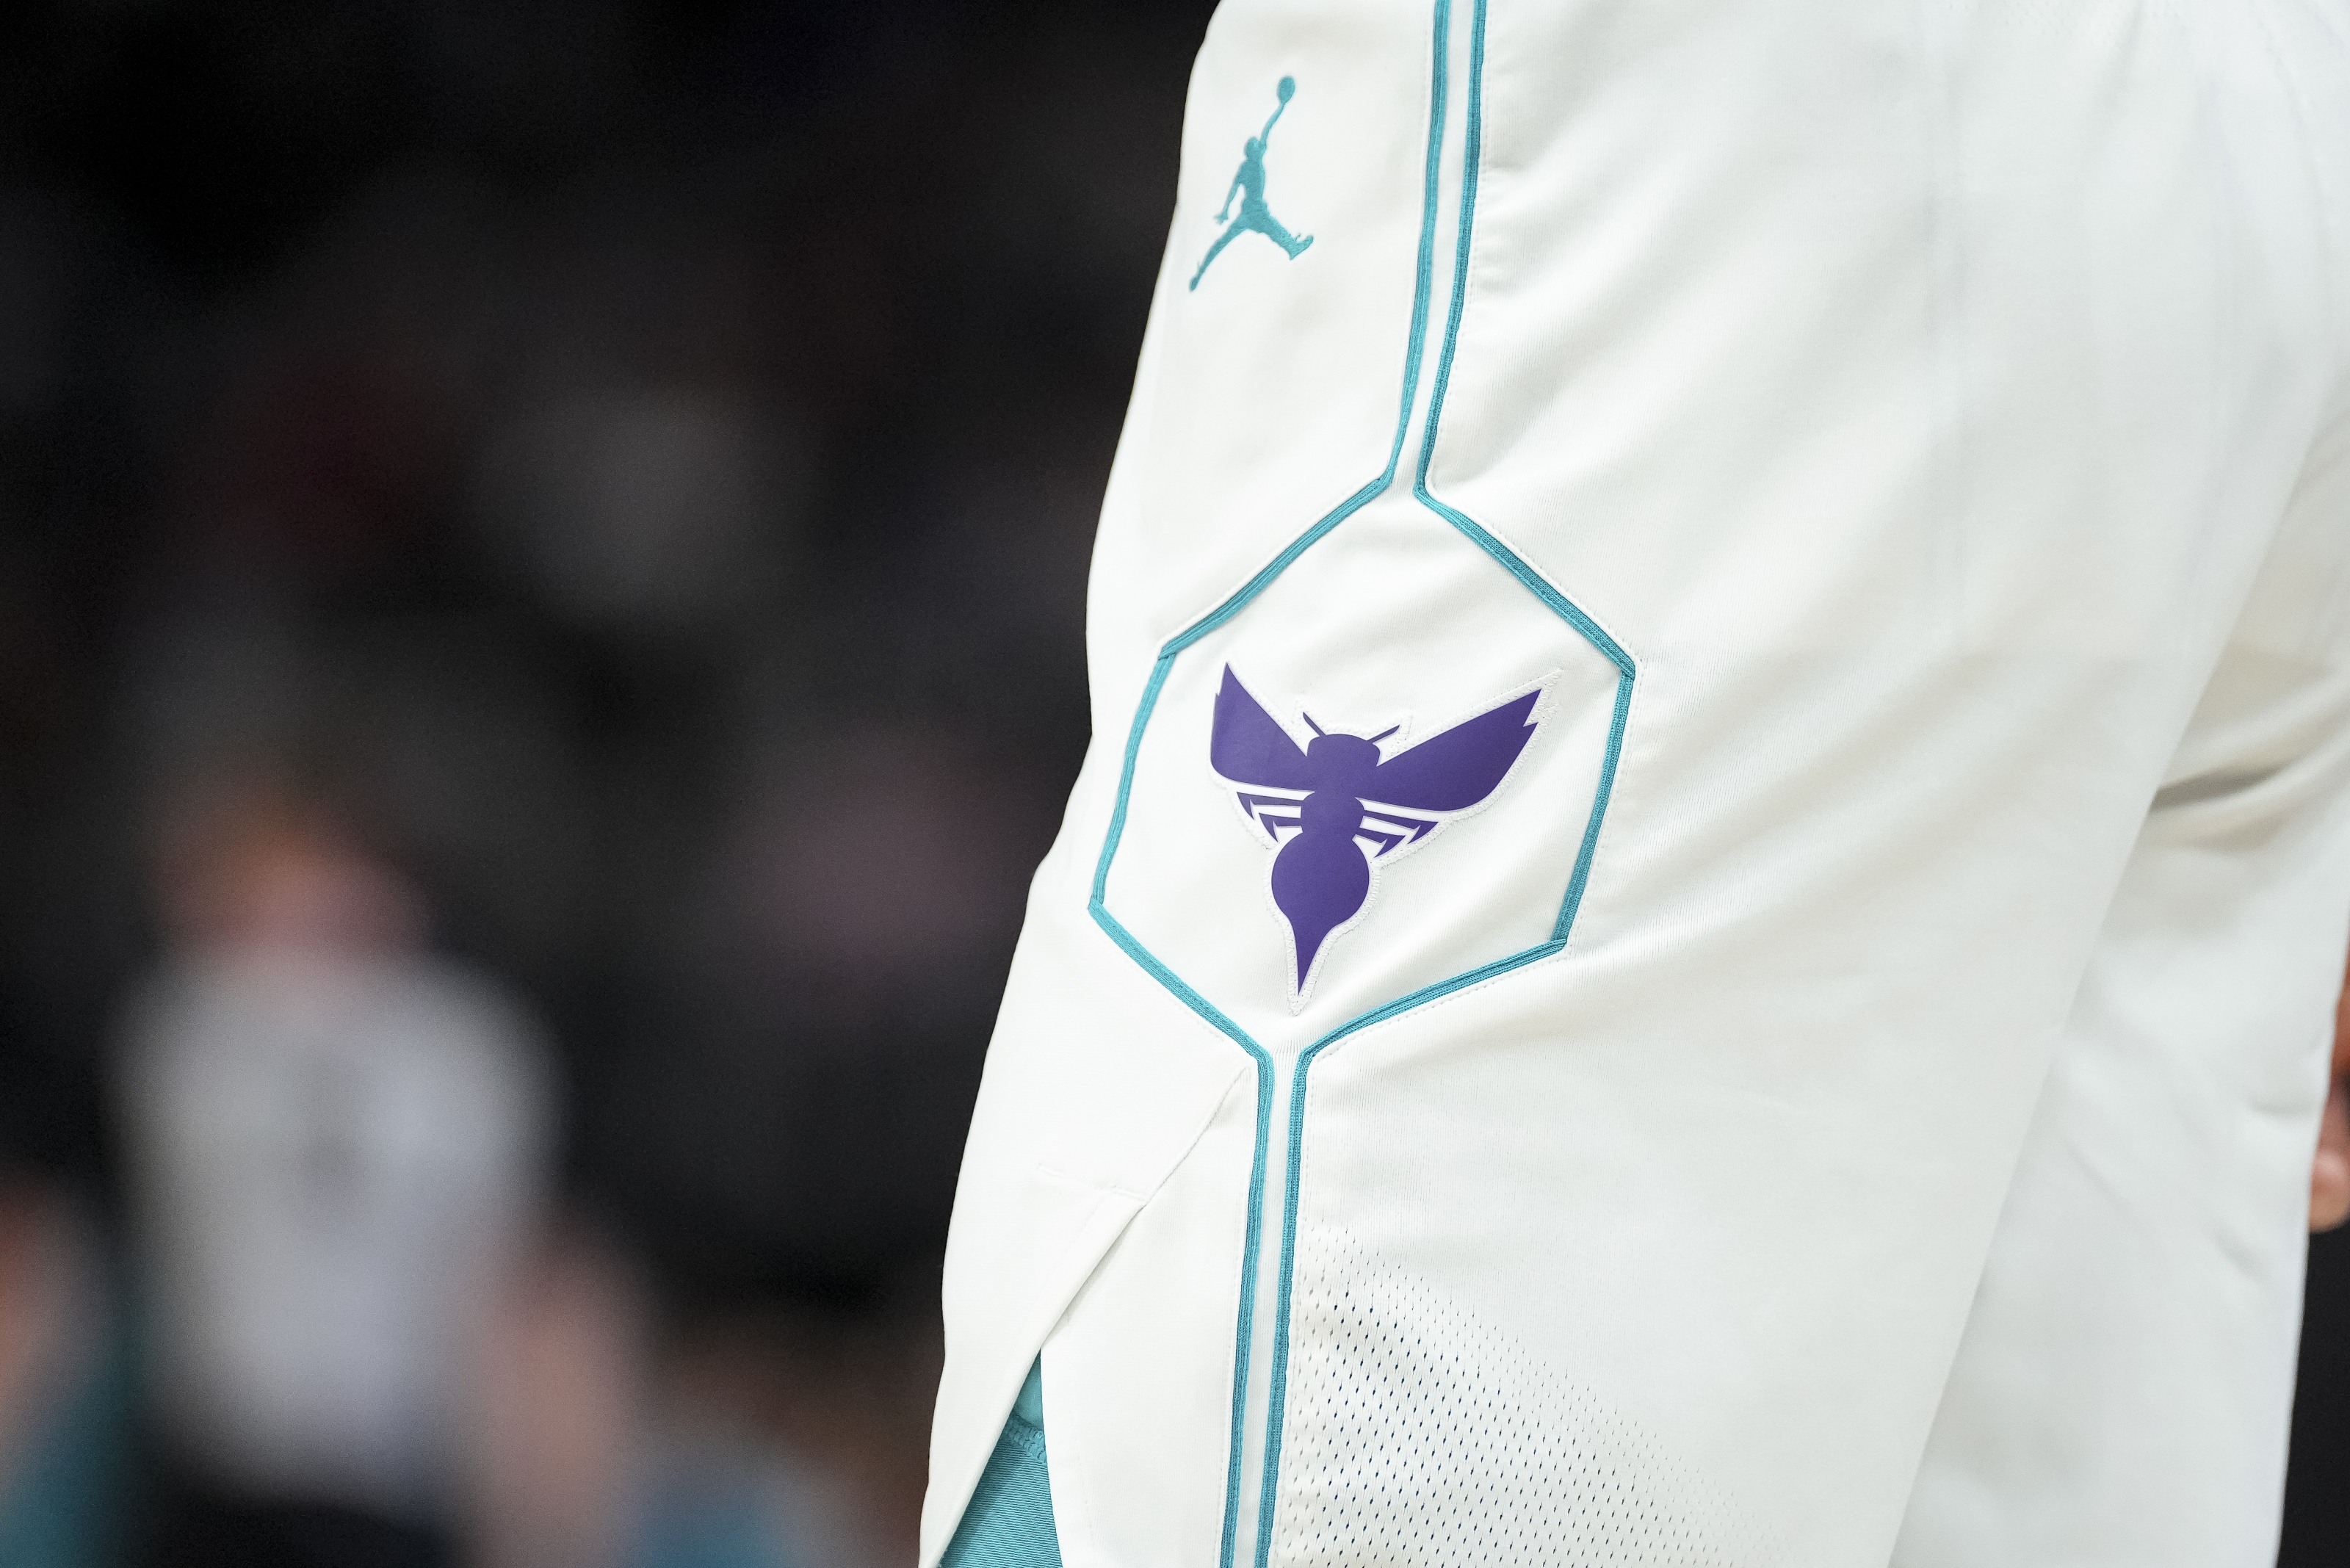 Which word was used to describe the Charlotte Hornets' offseason?